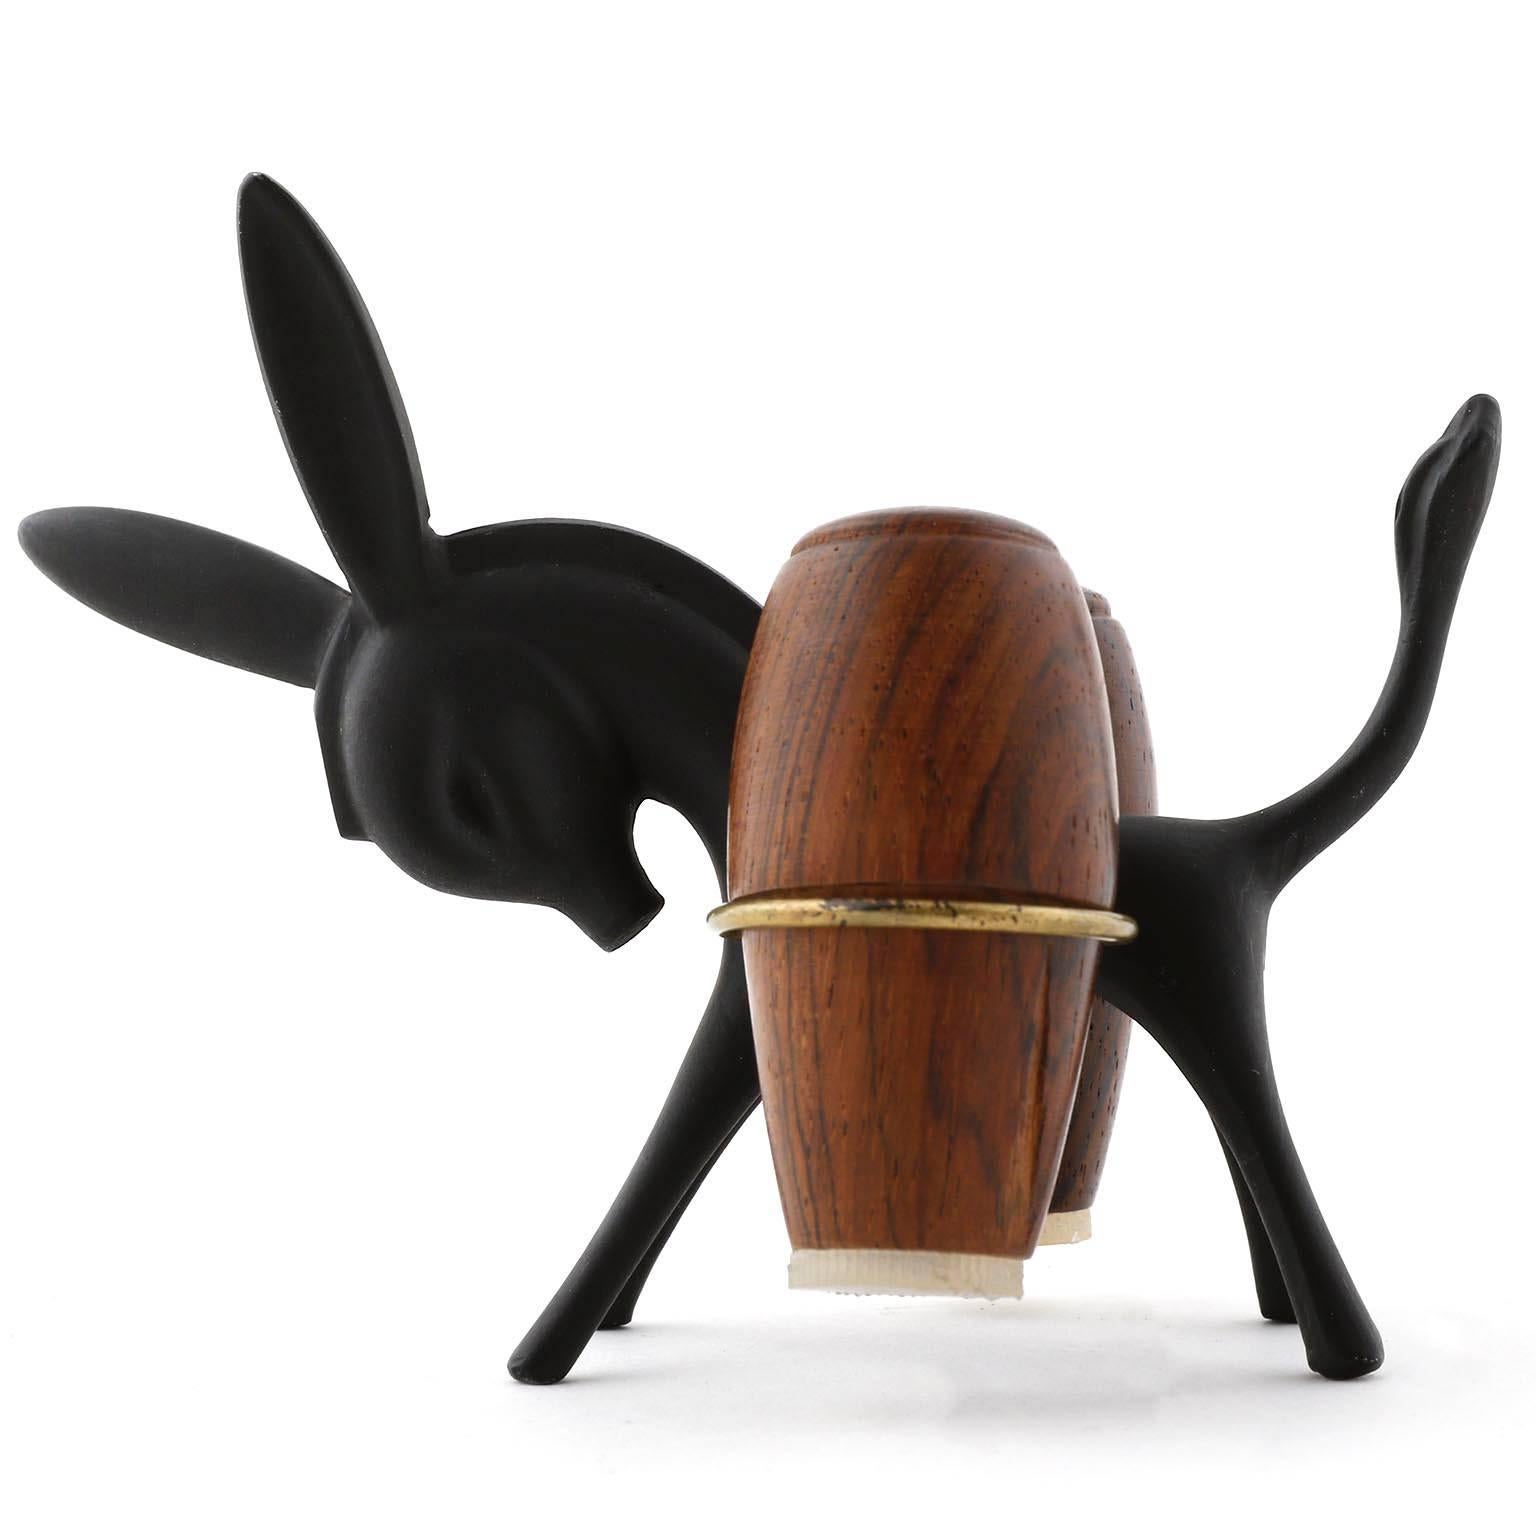 A salt and pepper donkey set designed by Walter Bosse and manufactured by Hertha Baller, Austria, Vienna, in midcentury in 1950s.
The donkey is made of blackened brass. The shakers are made of wood.
This charming piece is an eye-catcher for every